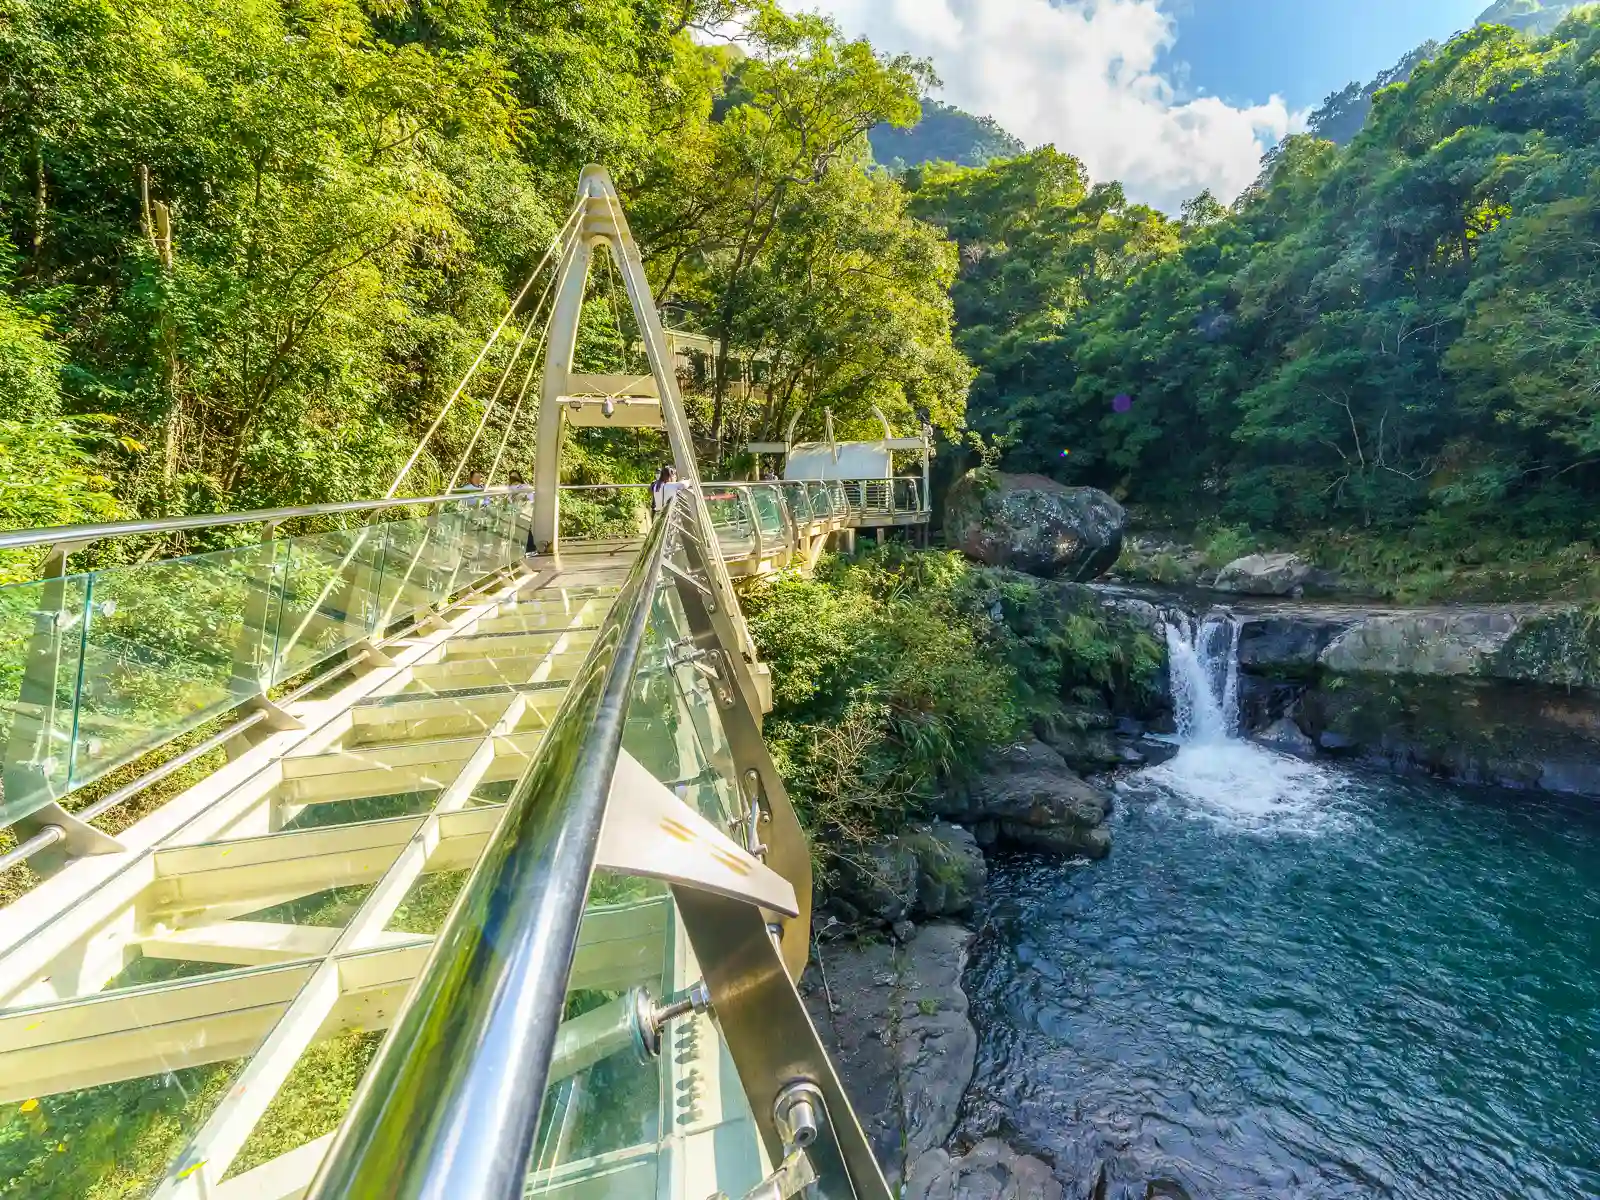 A glass-bottomed skywalk leads visitors out of the jungle and across river.